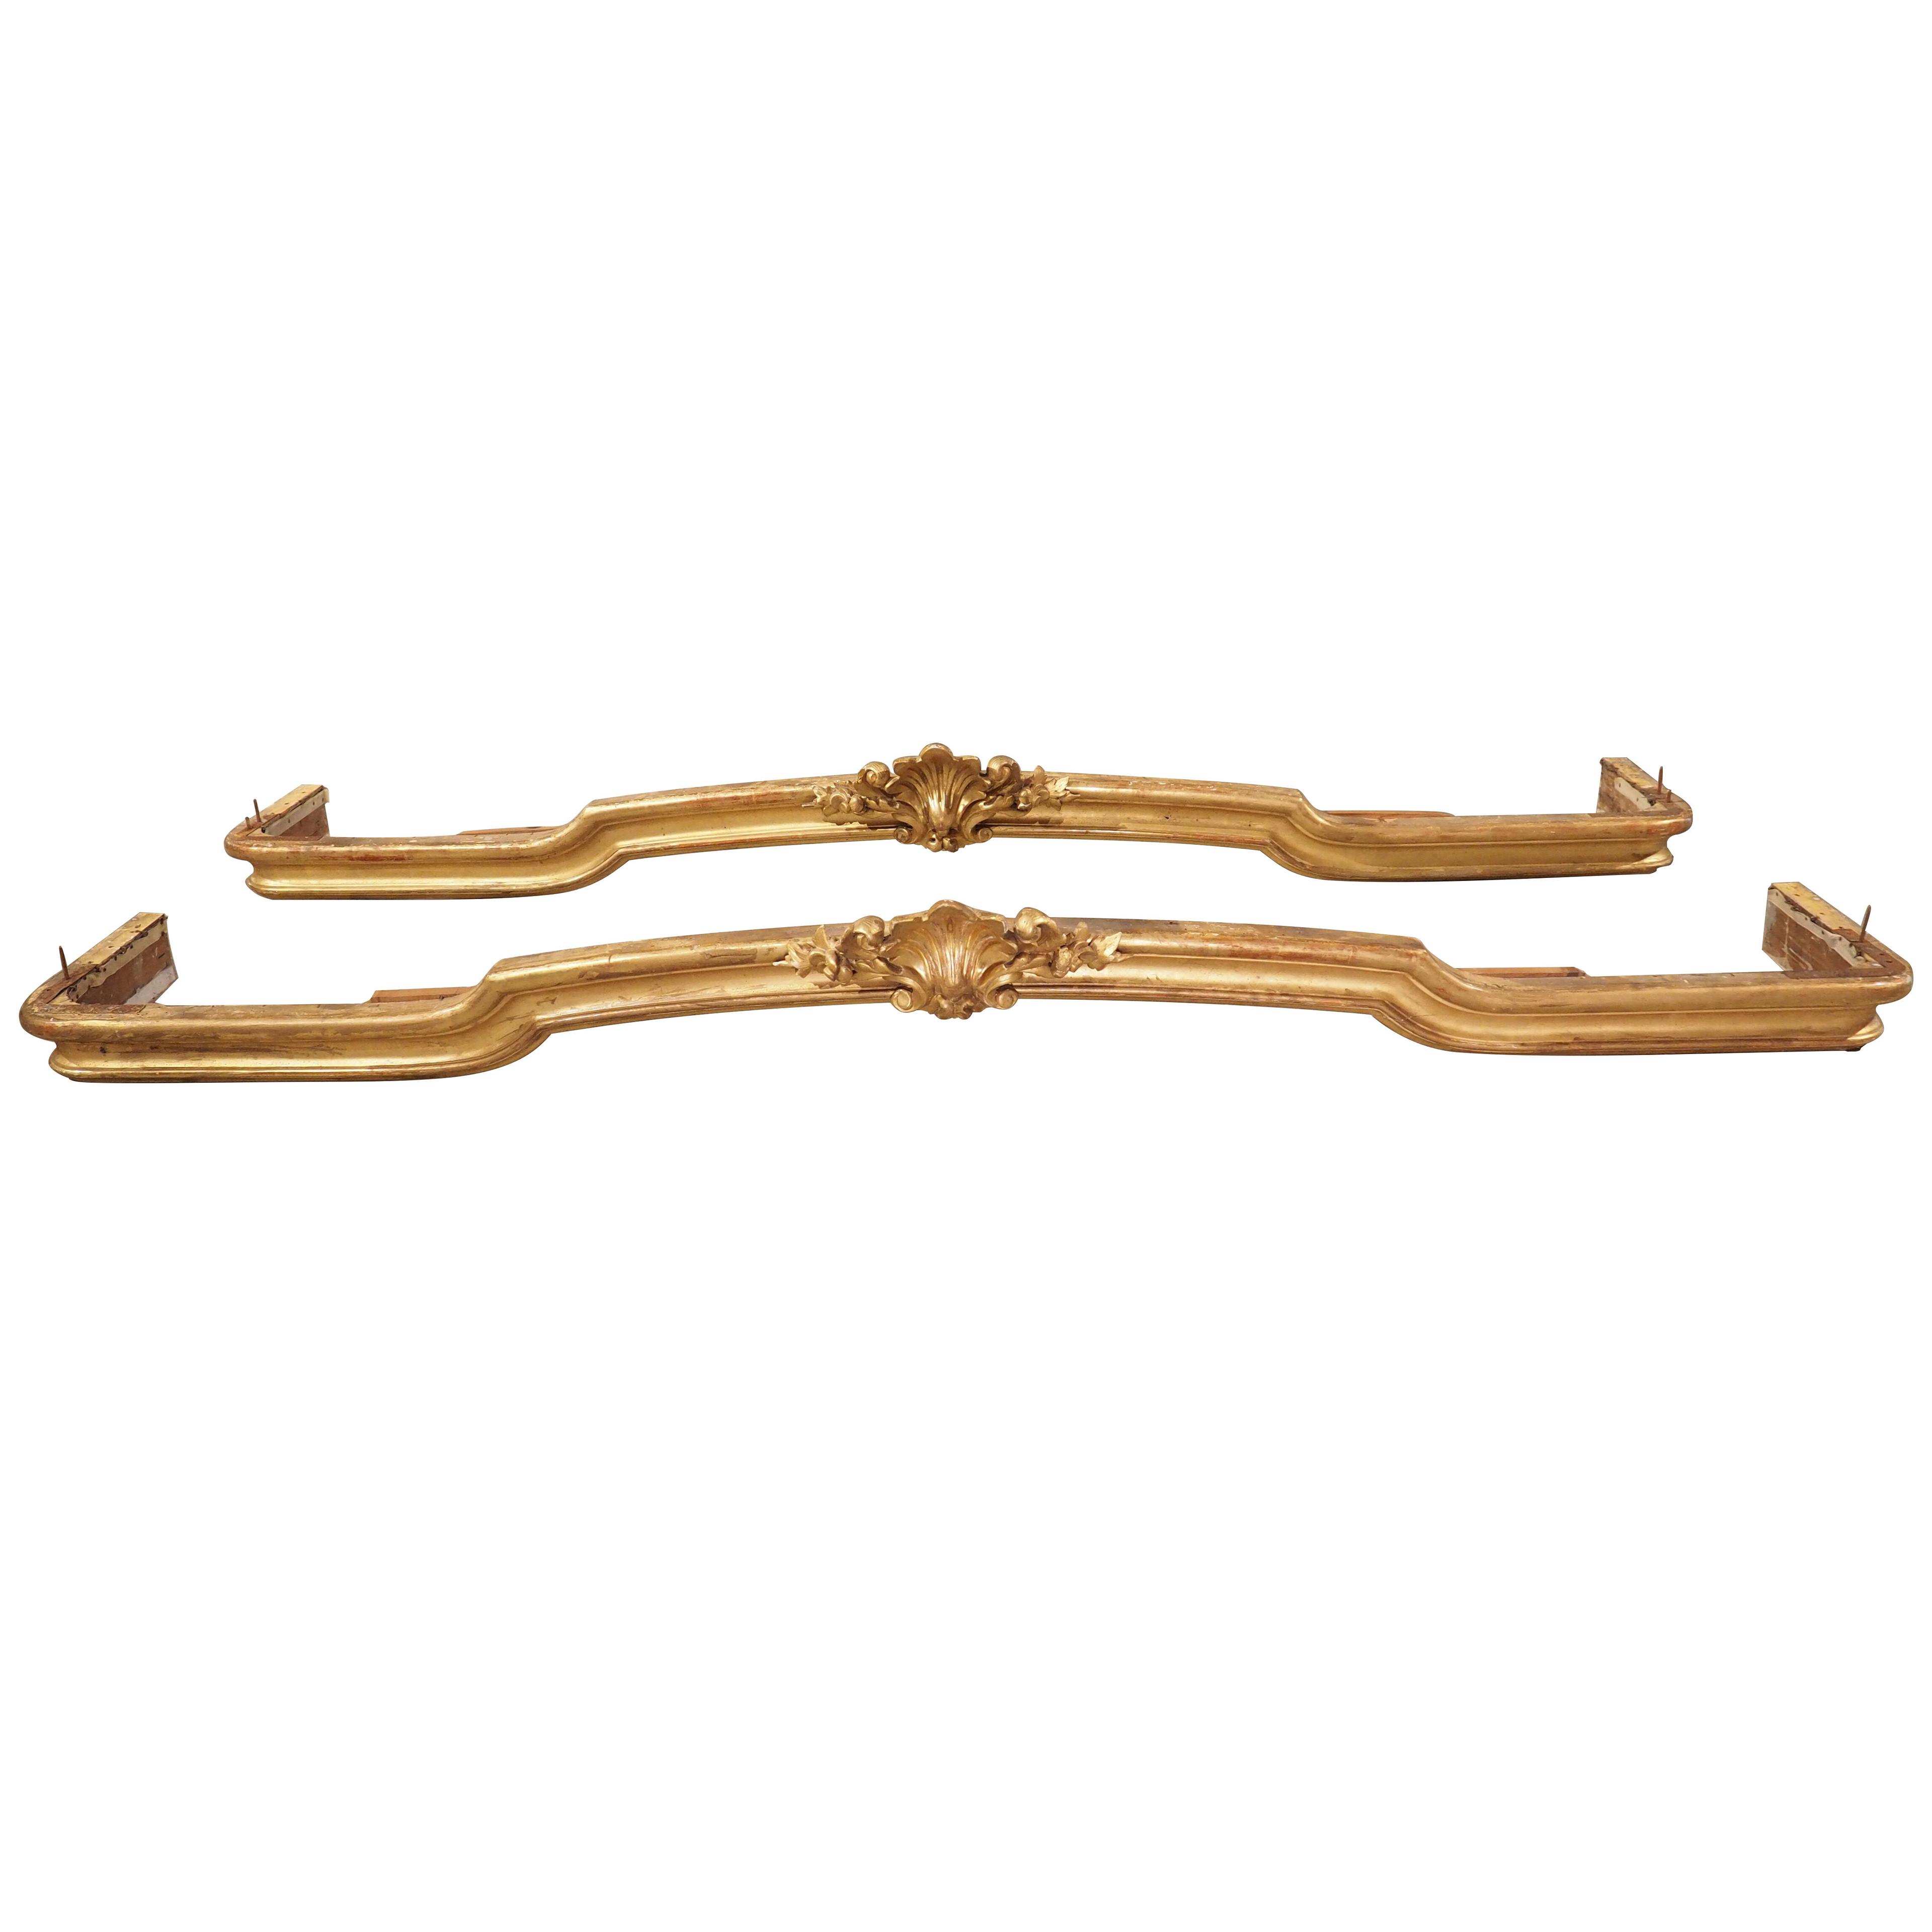 Pair of Long Antique French Giltwood Valances or “Cantonnieres”, Circa 1850